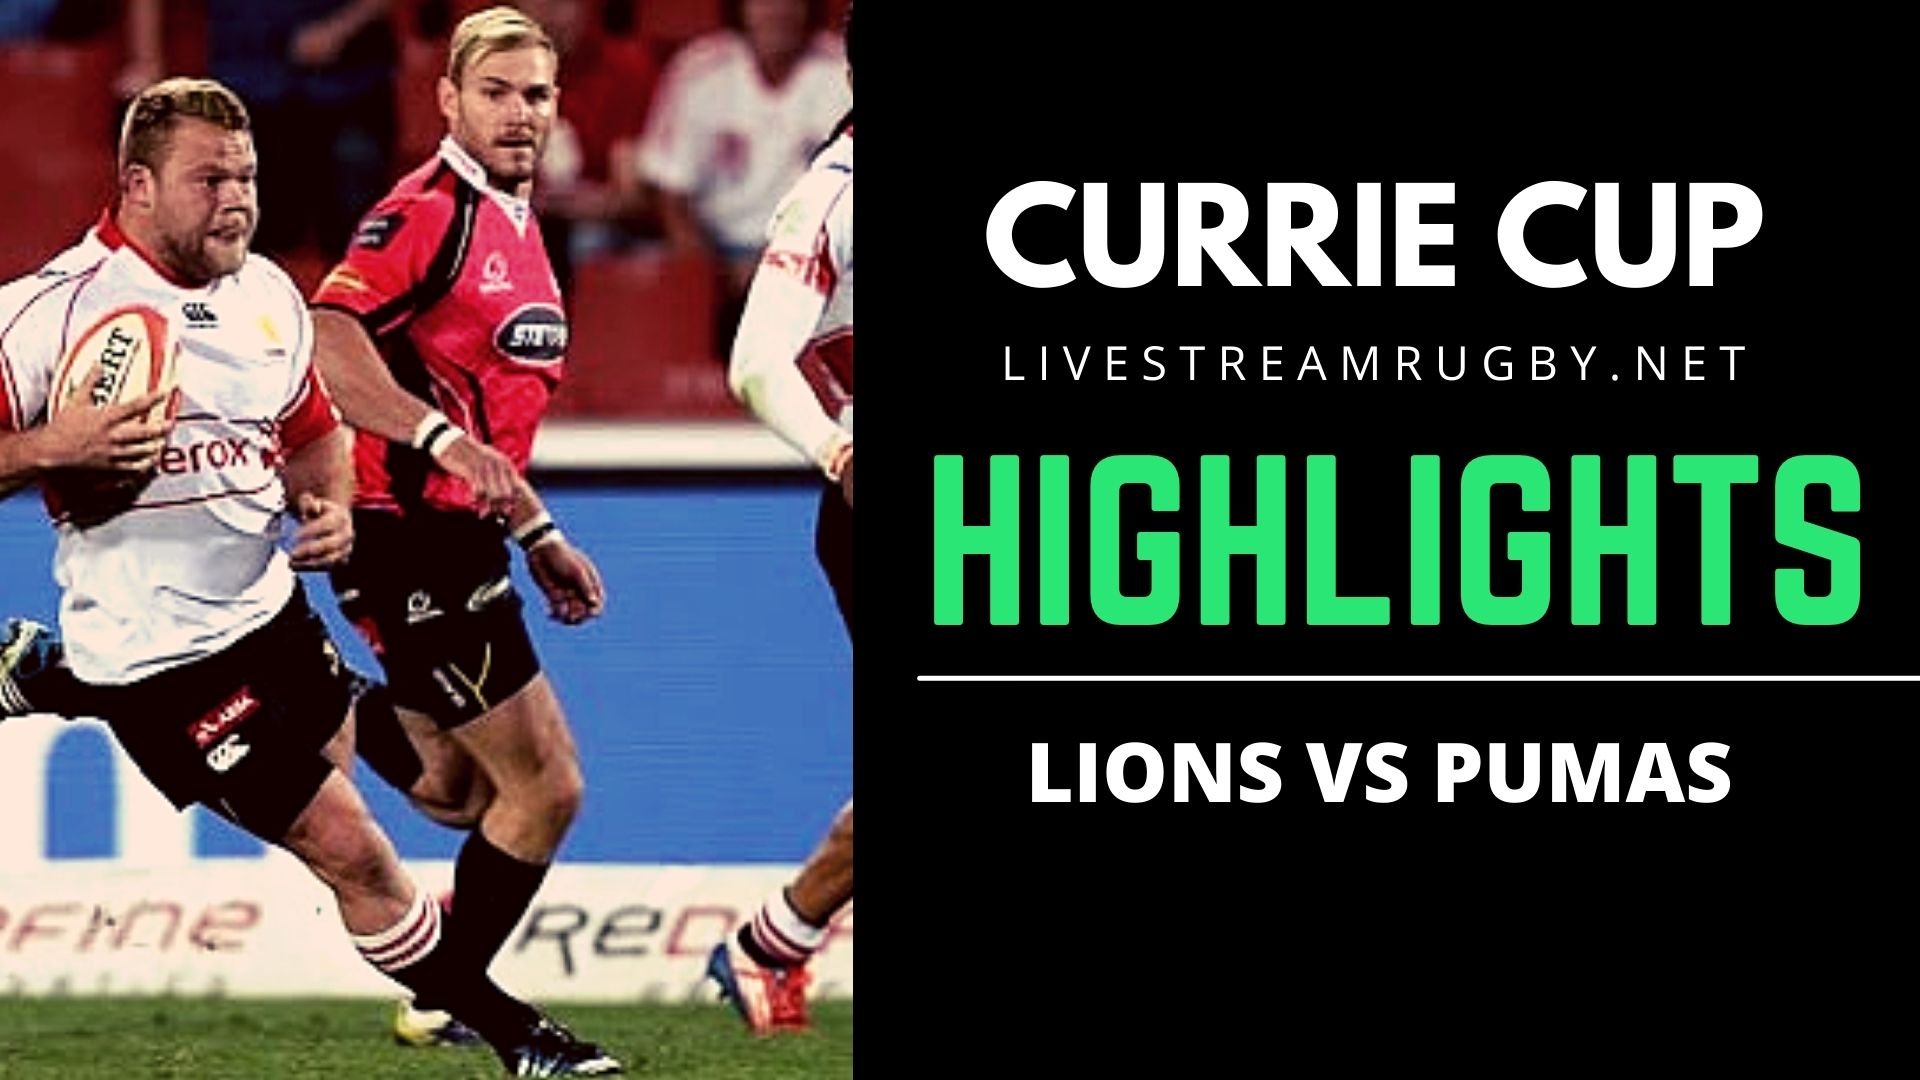 Lions Vs Pumas Highlights 2022 Rd 2 Currie Cup